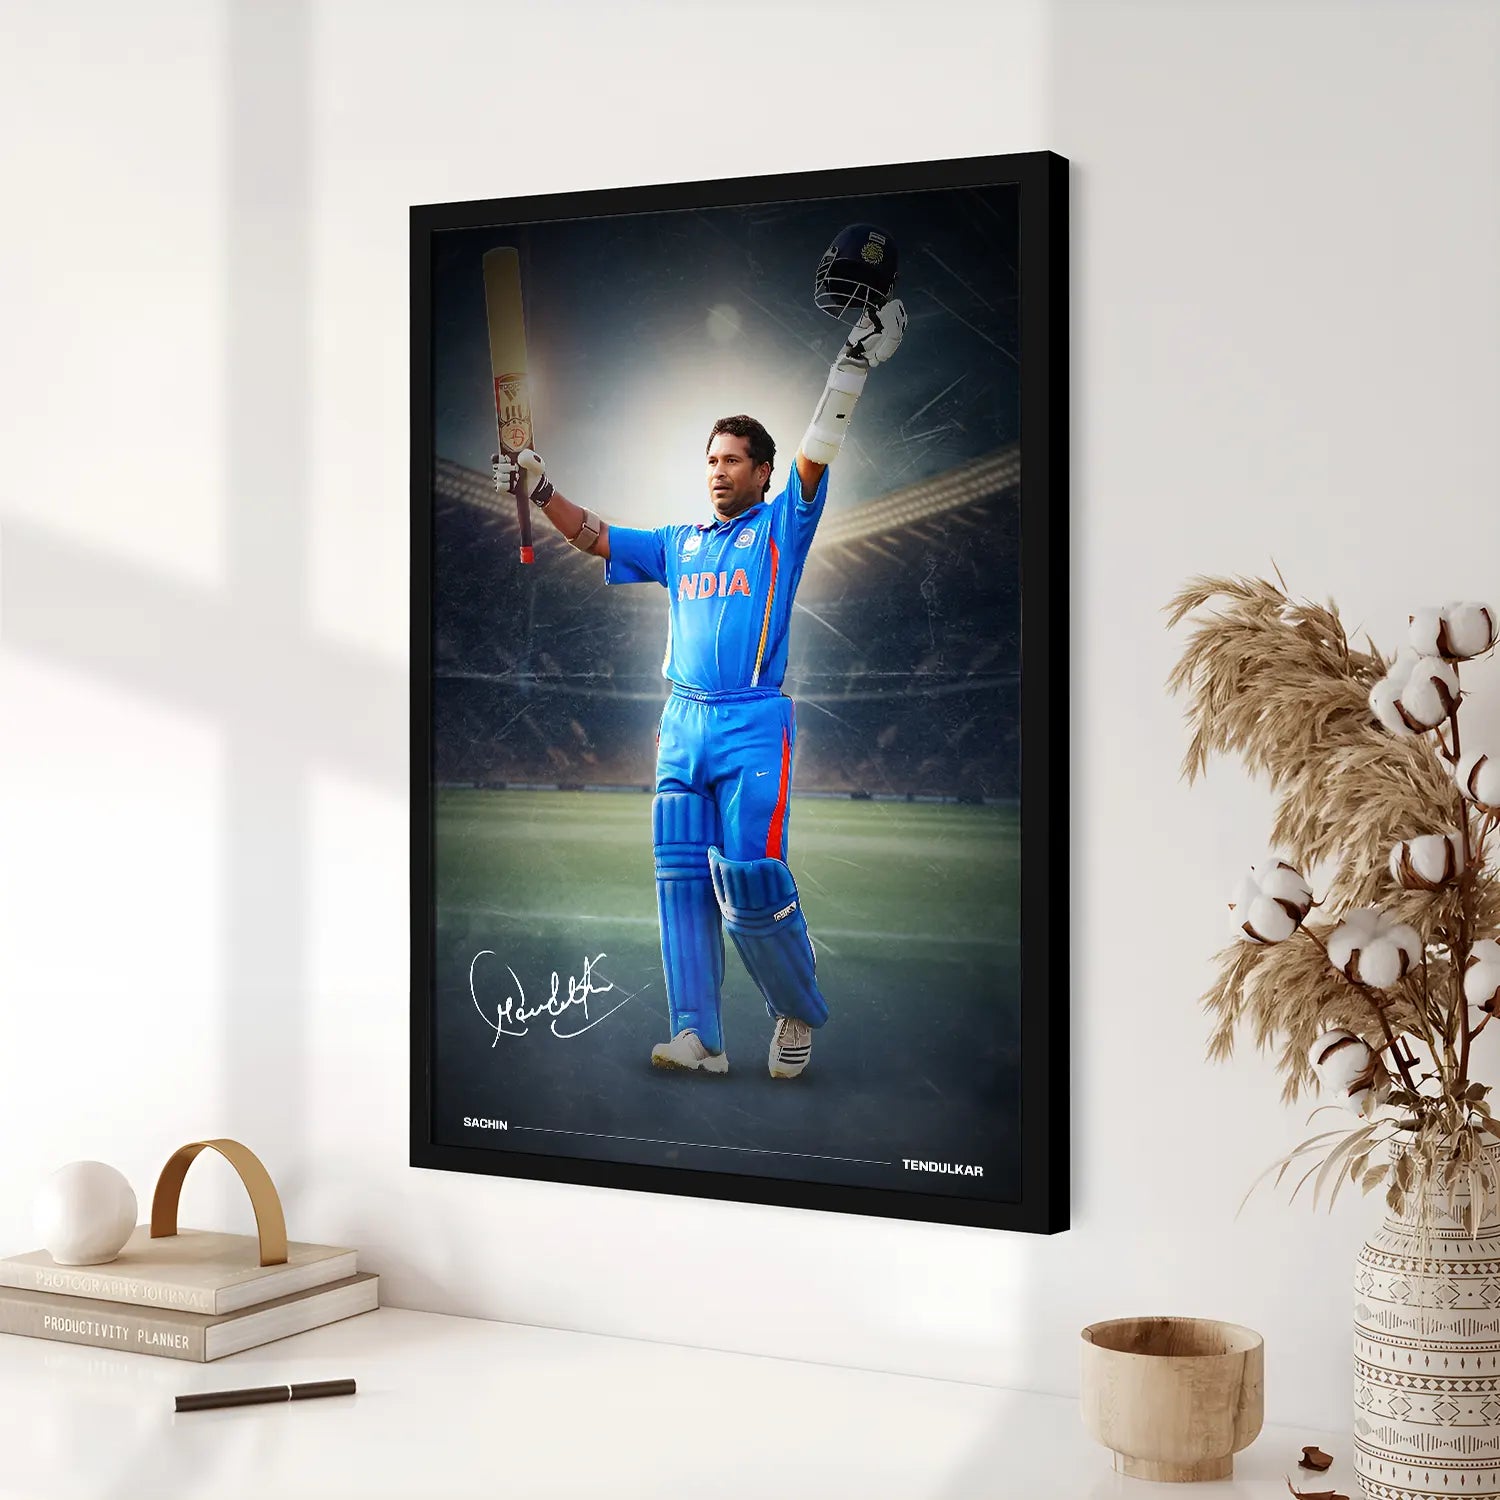 SIGNOOGLE Cricket Sachin Tendulkar 3d Stickers Posters Large For Wall  Bedroom Sports Room Or Any Other Suitable Place Multi Colored 45.50 x 30.50  Cm Pack Of 2 : Amazon.in: Home & Kitchen